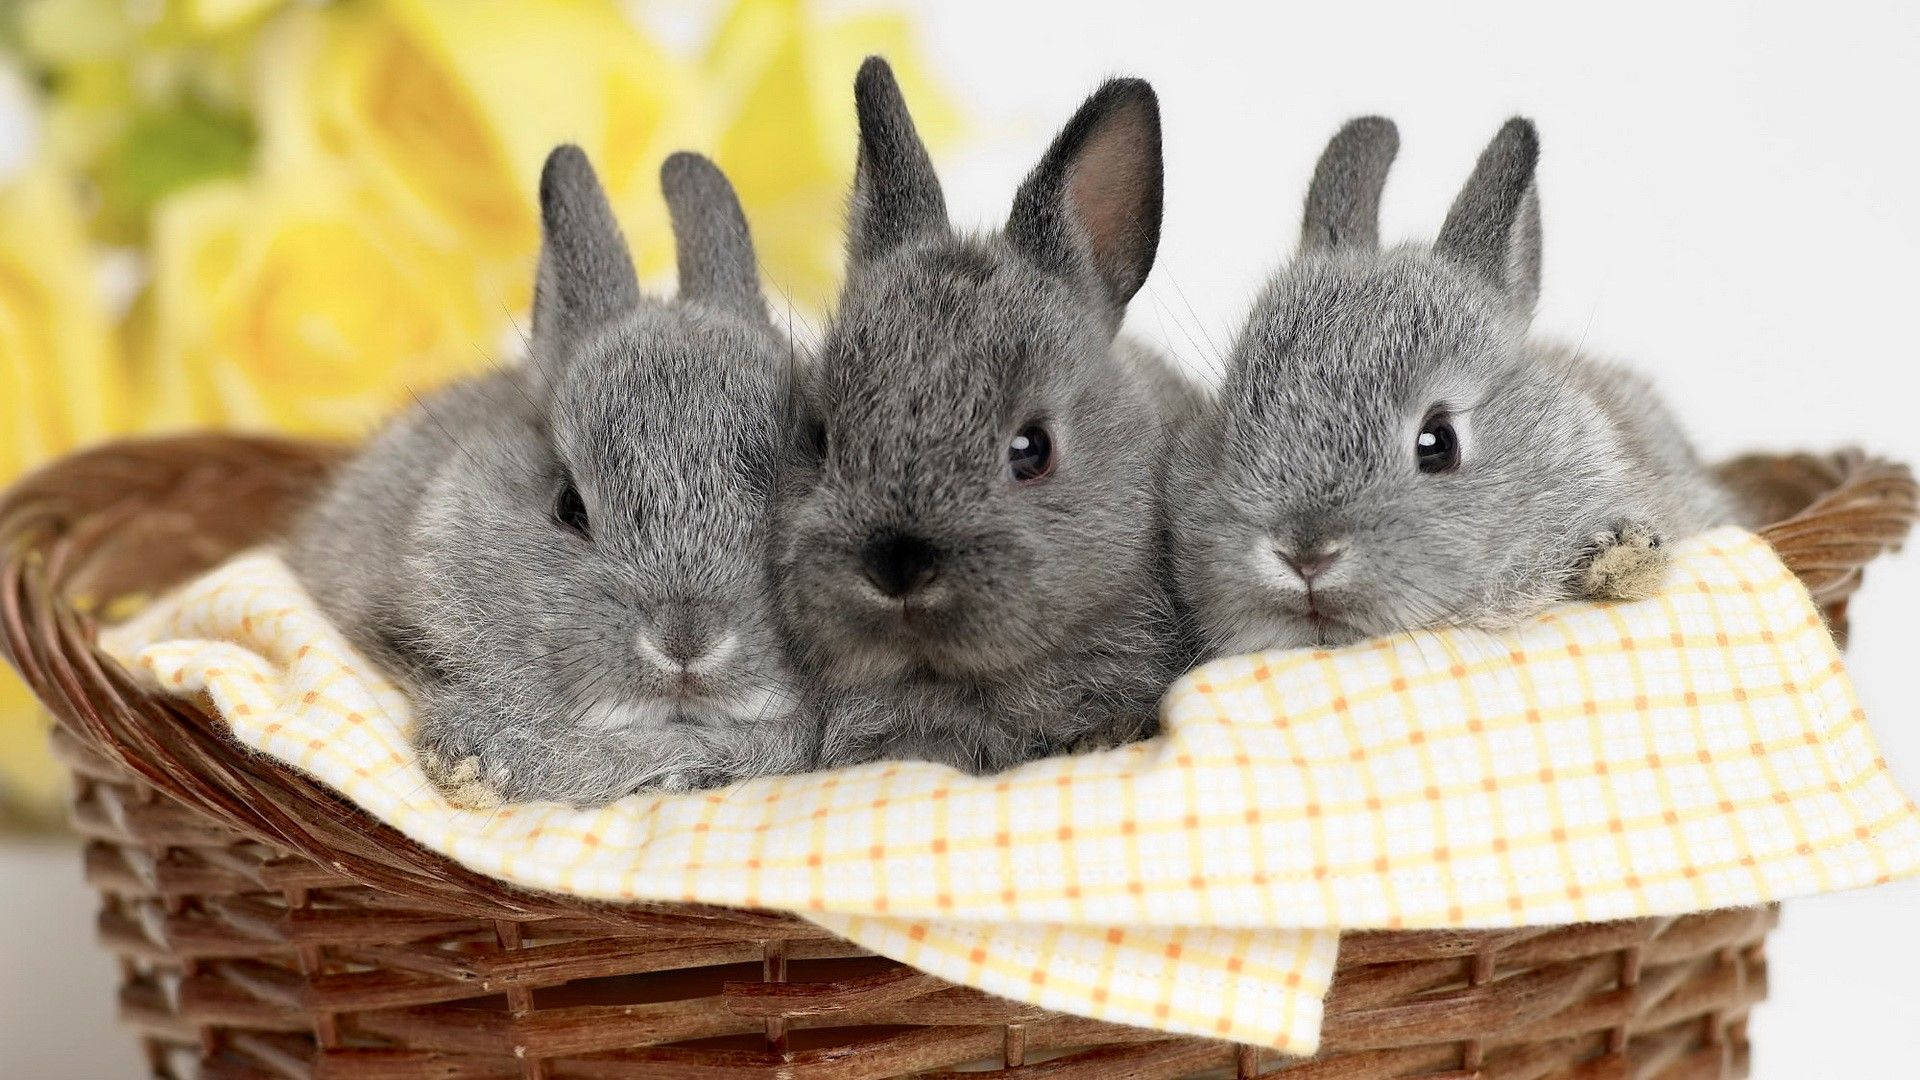 Two Adorable Gray Bunnies In A Woven Basket Background